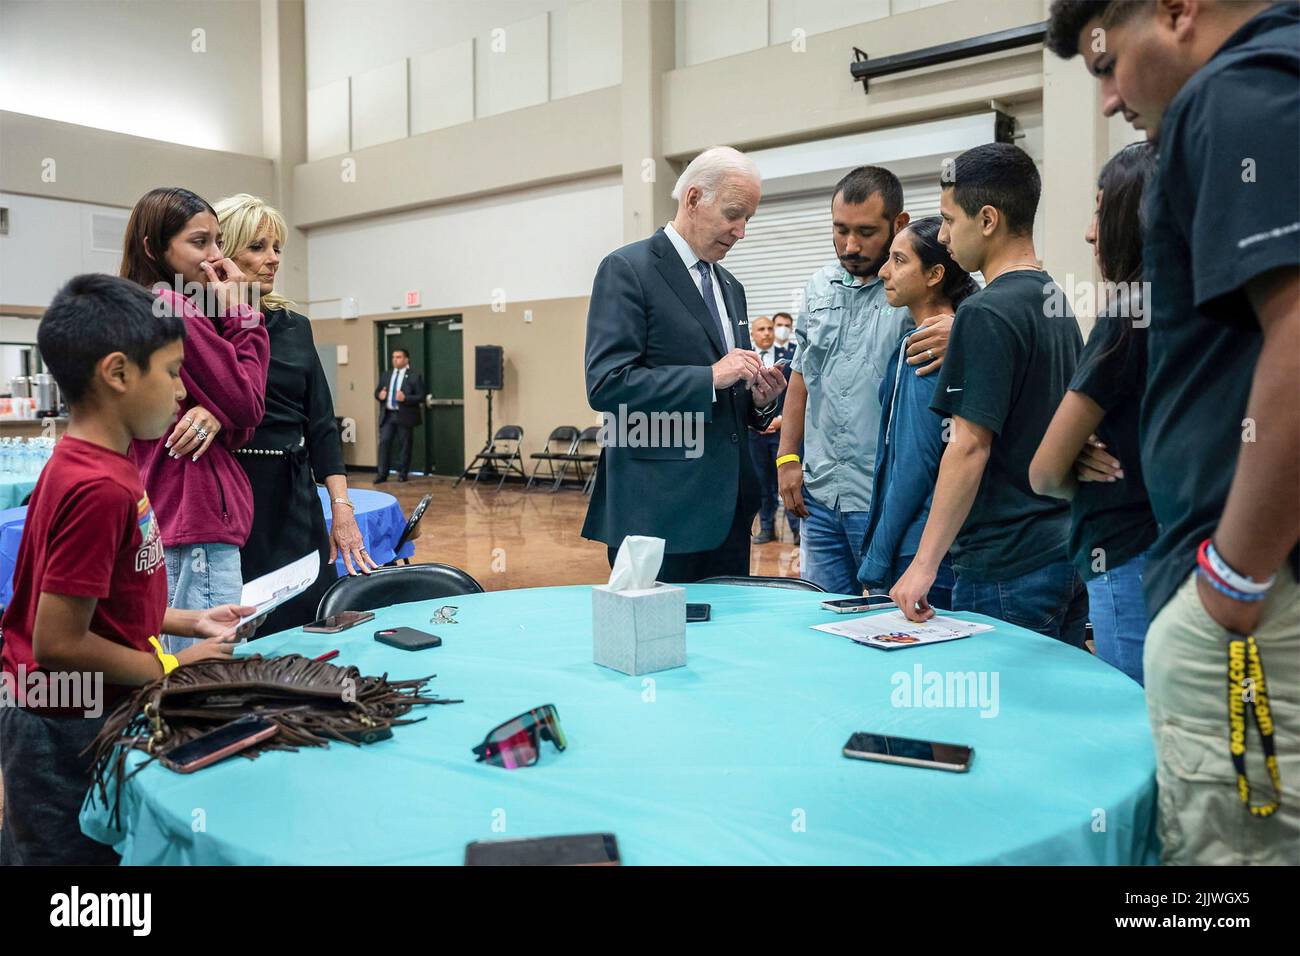 Uvalde, United States of America. 29 May, 2022. U.S President Joe Biden and first lady Dr. Jill Biden meet with families of the victims of the mass shooting at Robb Elementary School, May 29, 2022 in Uvalde, Texas. The school is the site where a gunman slaughtered 19 students and two teachers with a military style assault rifle.  Credit: Adam Schultz/White House Photo/Alamy Live News Stock Photo